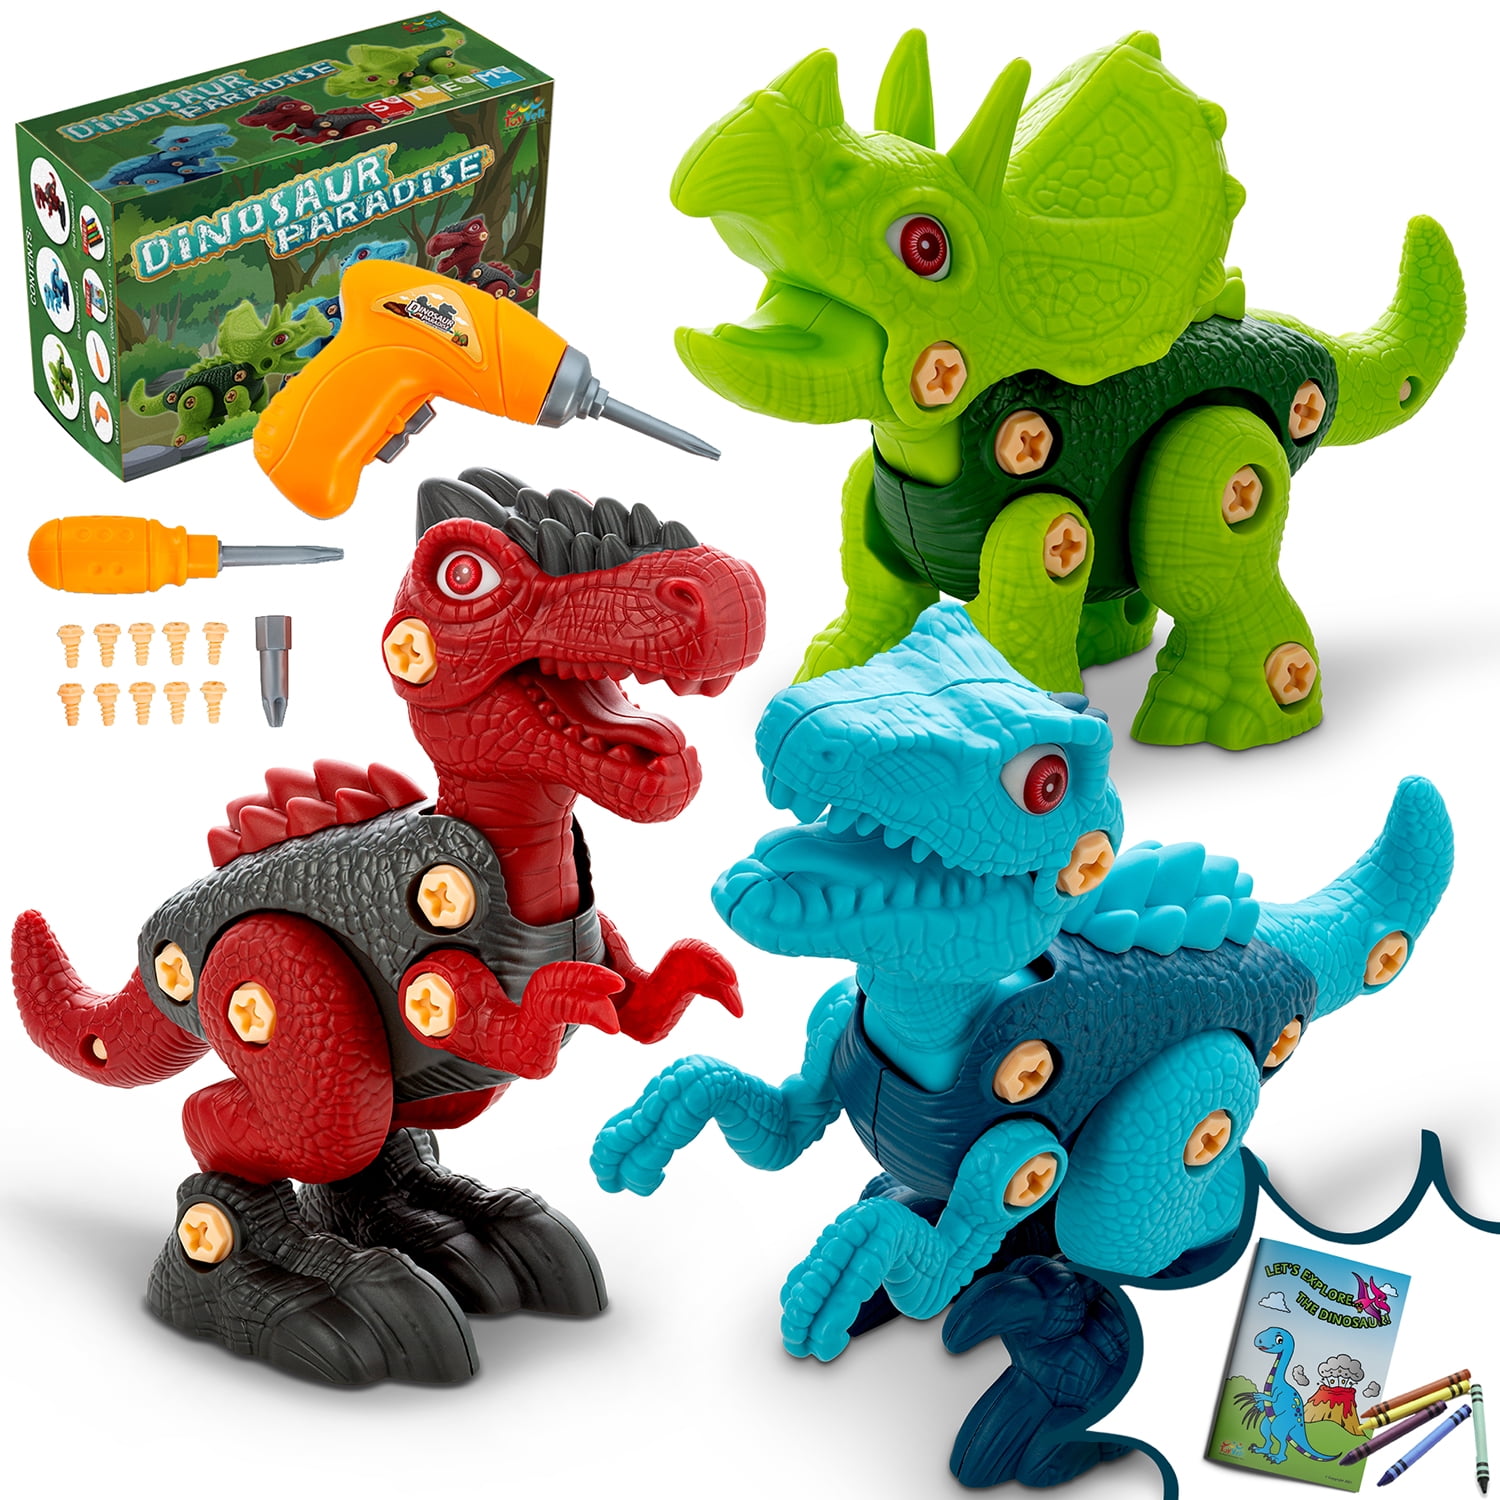 Best Toy Gift Kids Ages 4yr Dinosaur Take Apart Toys- Set of 6 Building Dinosaurs Egg Toys,6 Dinosaurs In 1 Big Dinosaur,Construction Engineering Building Play Set For Boys Girls 193 pieces 12yr